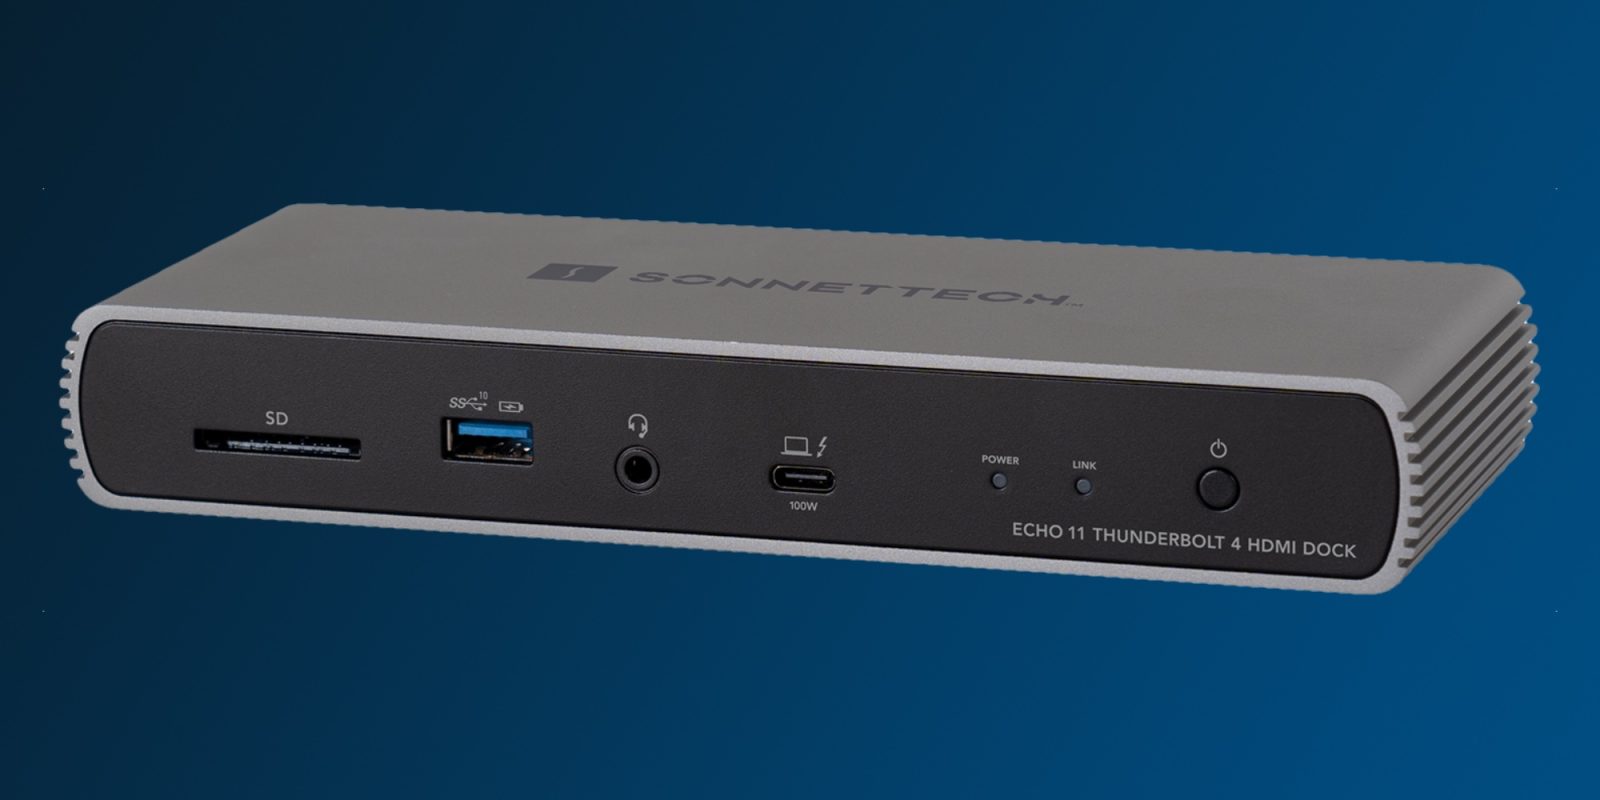 Sonnet debuts new echo 11 thunderbolt 4 dock with 4k60